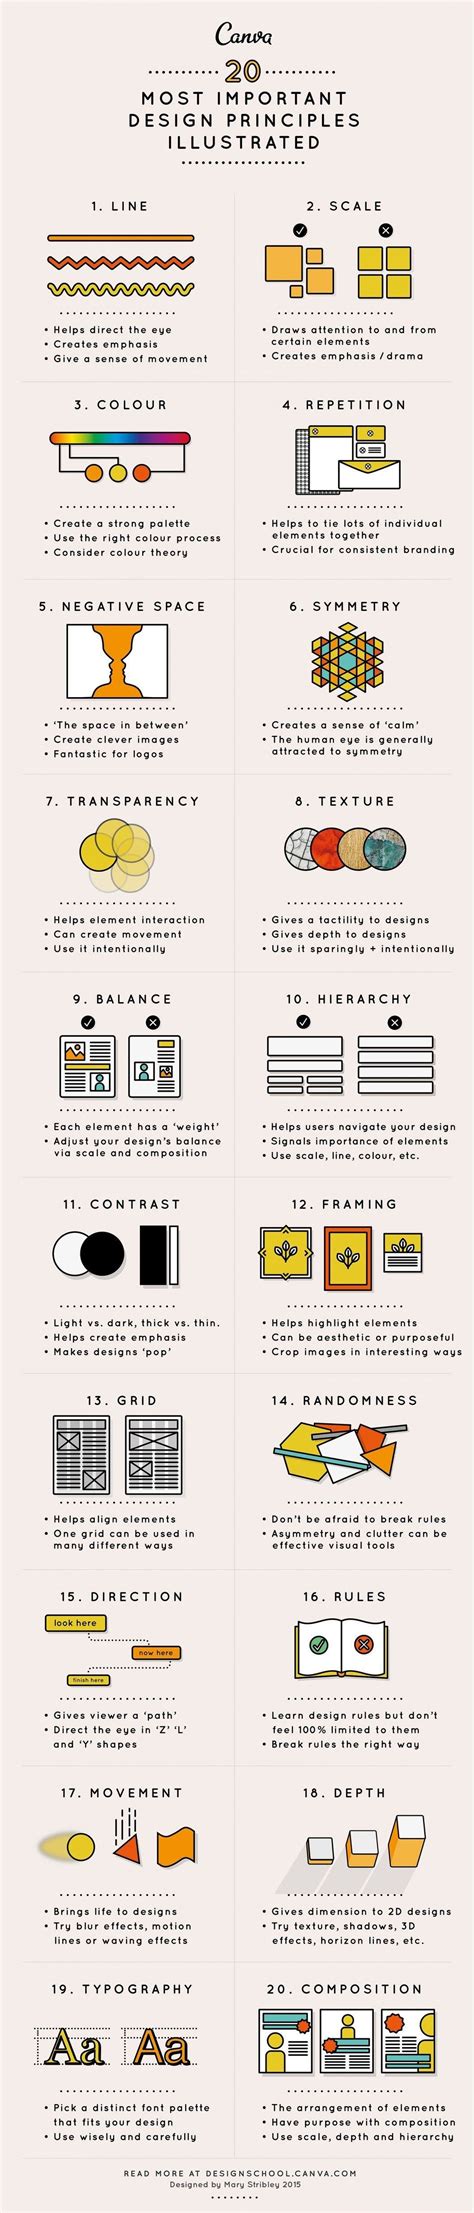 The 20 Most Important Design Principles Illustrated Infographic